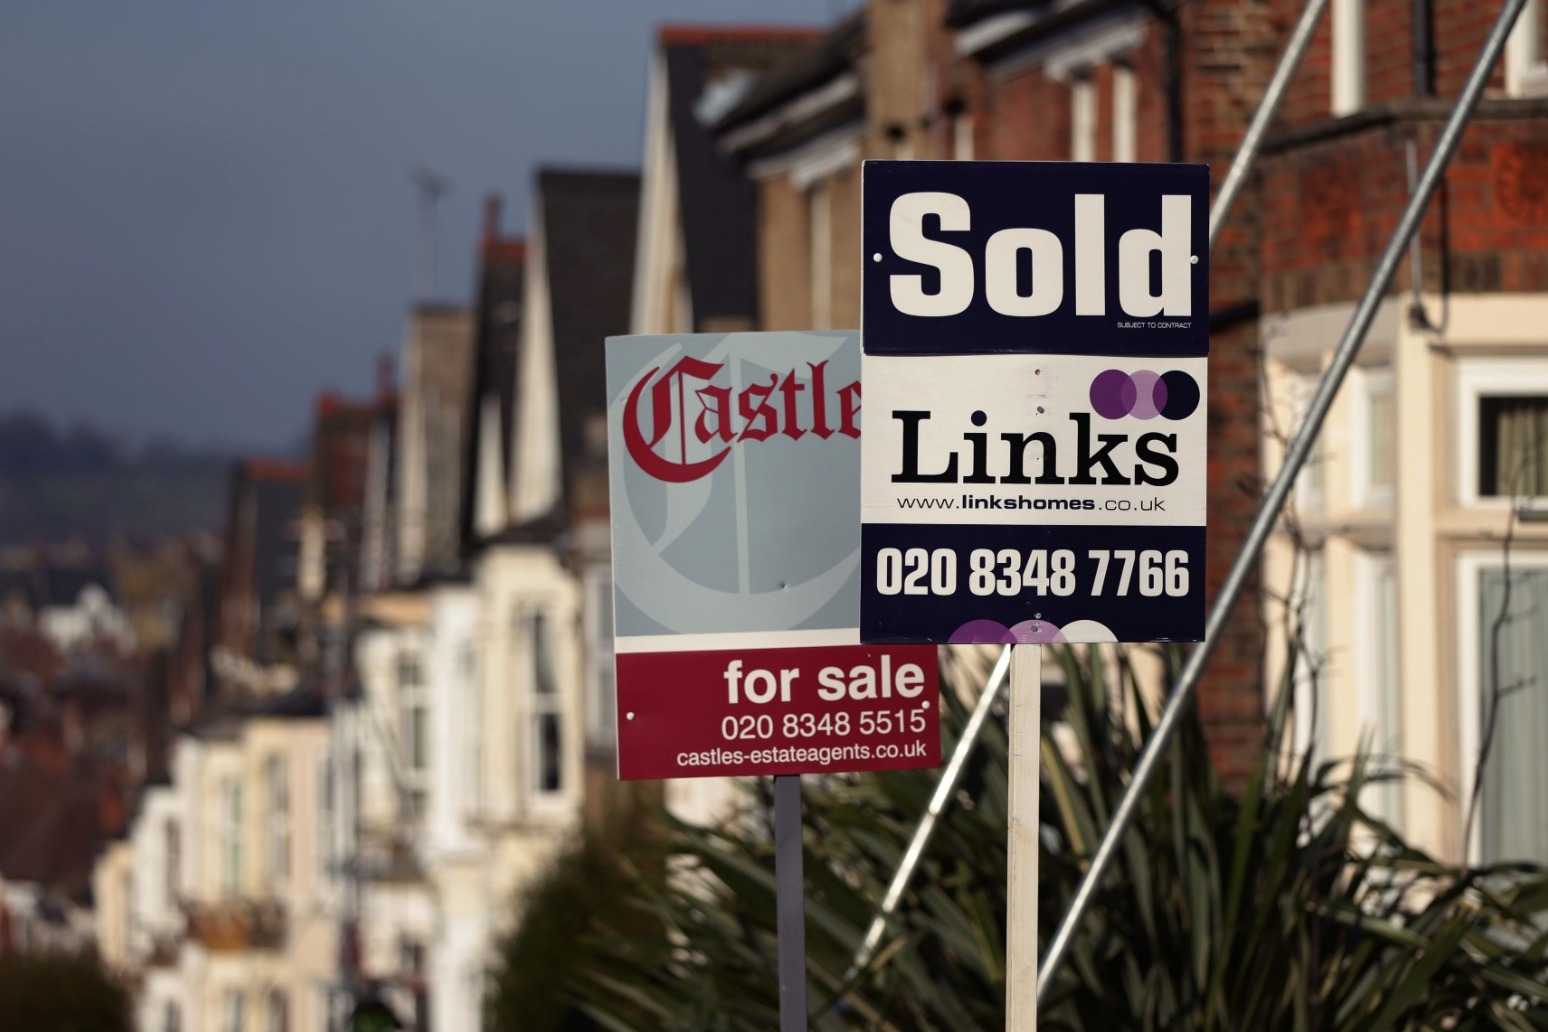 House prices show small increase 